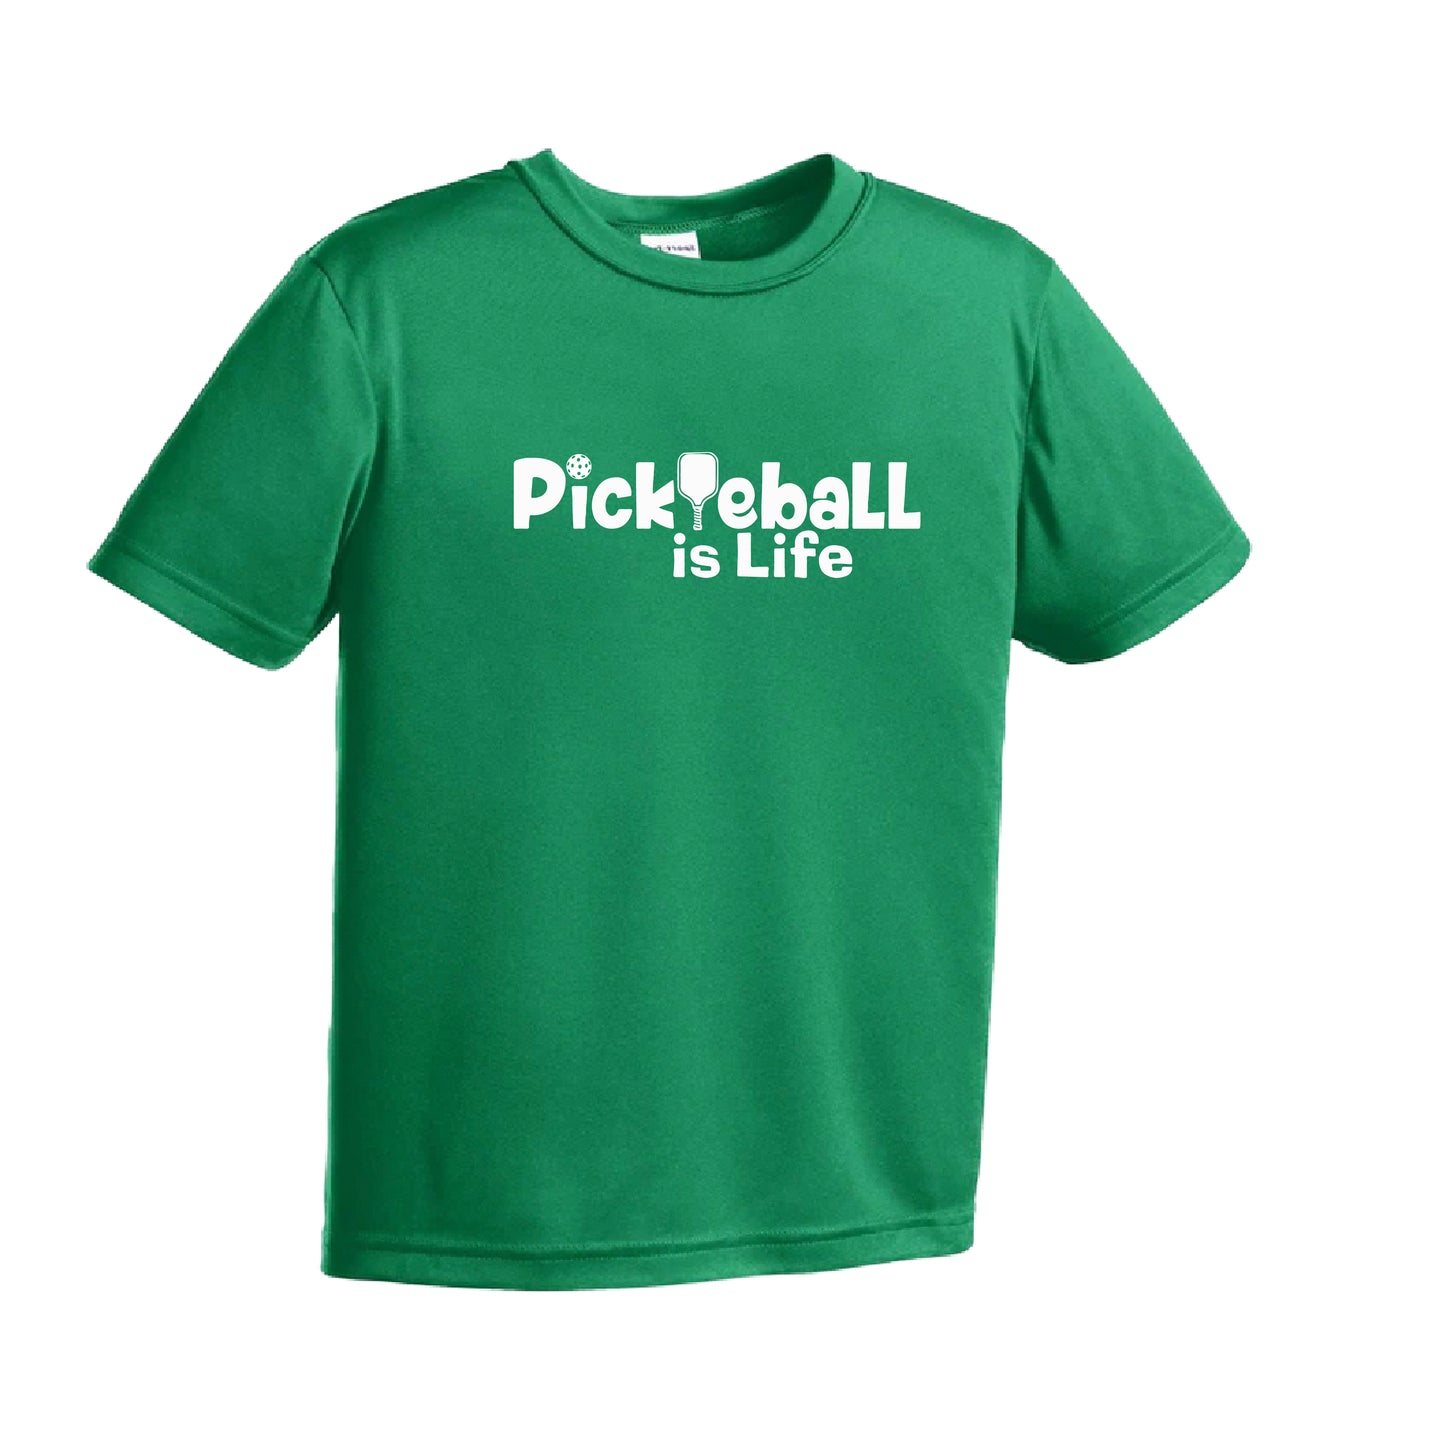 Pickleball is Life | Youth Short Sleeve Athletic Pickleball Shirt | 100% Polyester